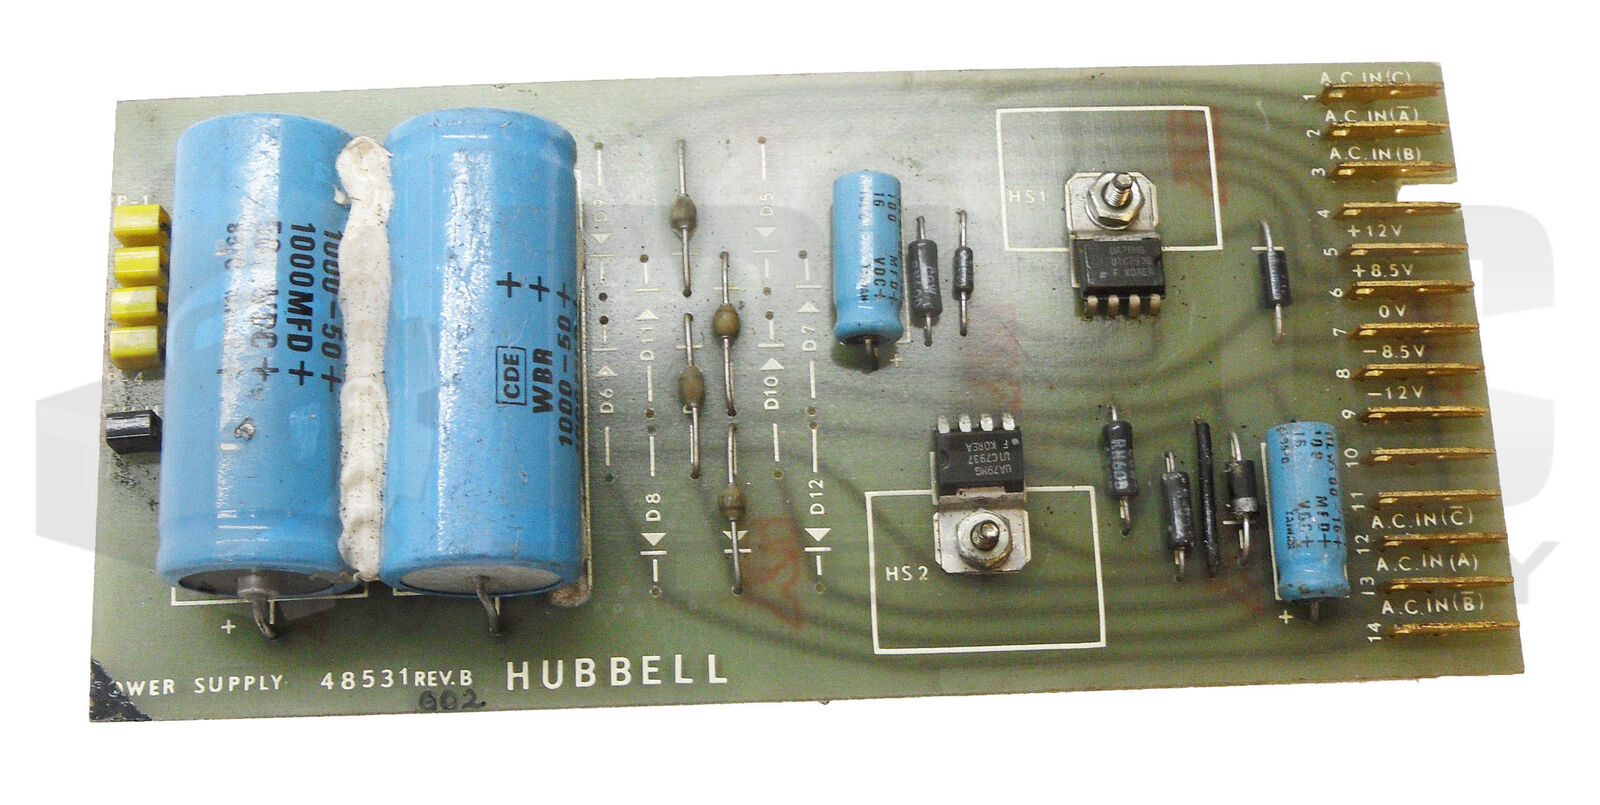 HUBBELL 48531 POWER SUPPLY CIRCUIT BOARD 48531-002